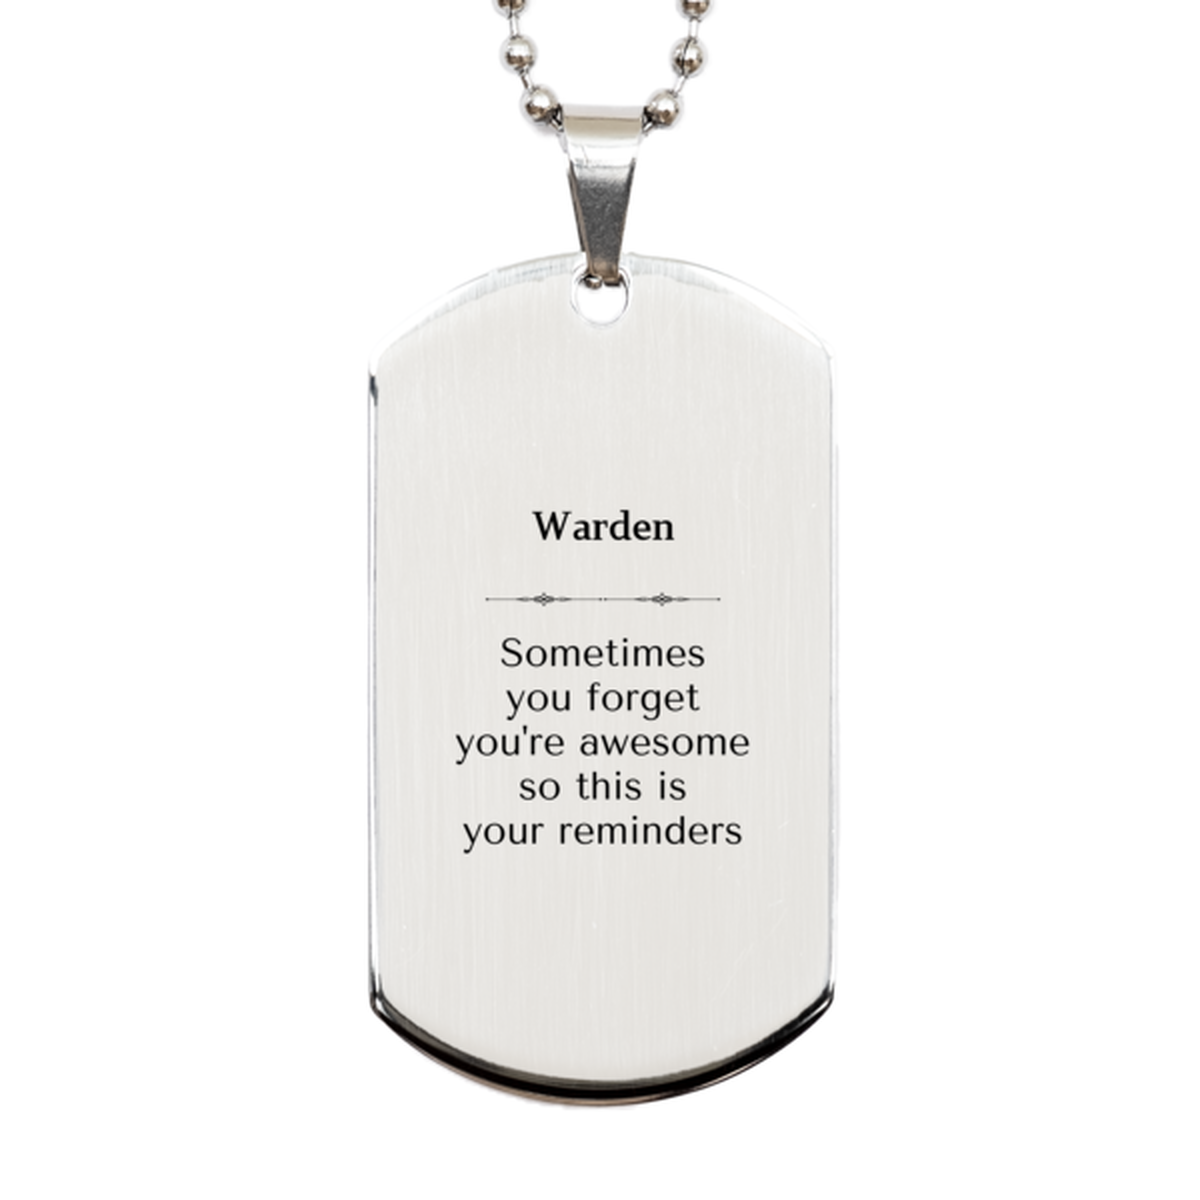 Sentimental Warden Silver Dog Tag, Warden Sometimes you forget you're awesome so this is your reminders, Graduation Christmas Birthday Gifts for Warden, Men, Women, Coworkers